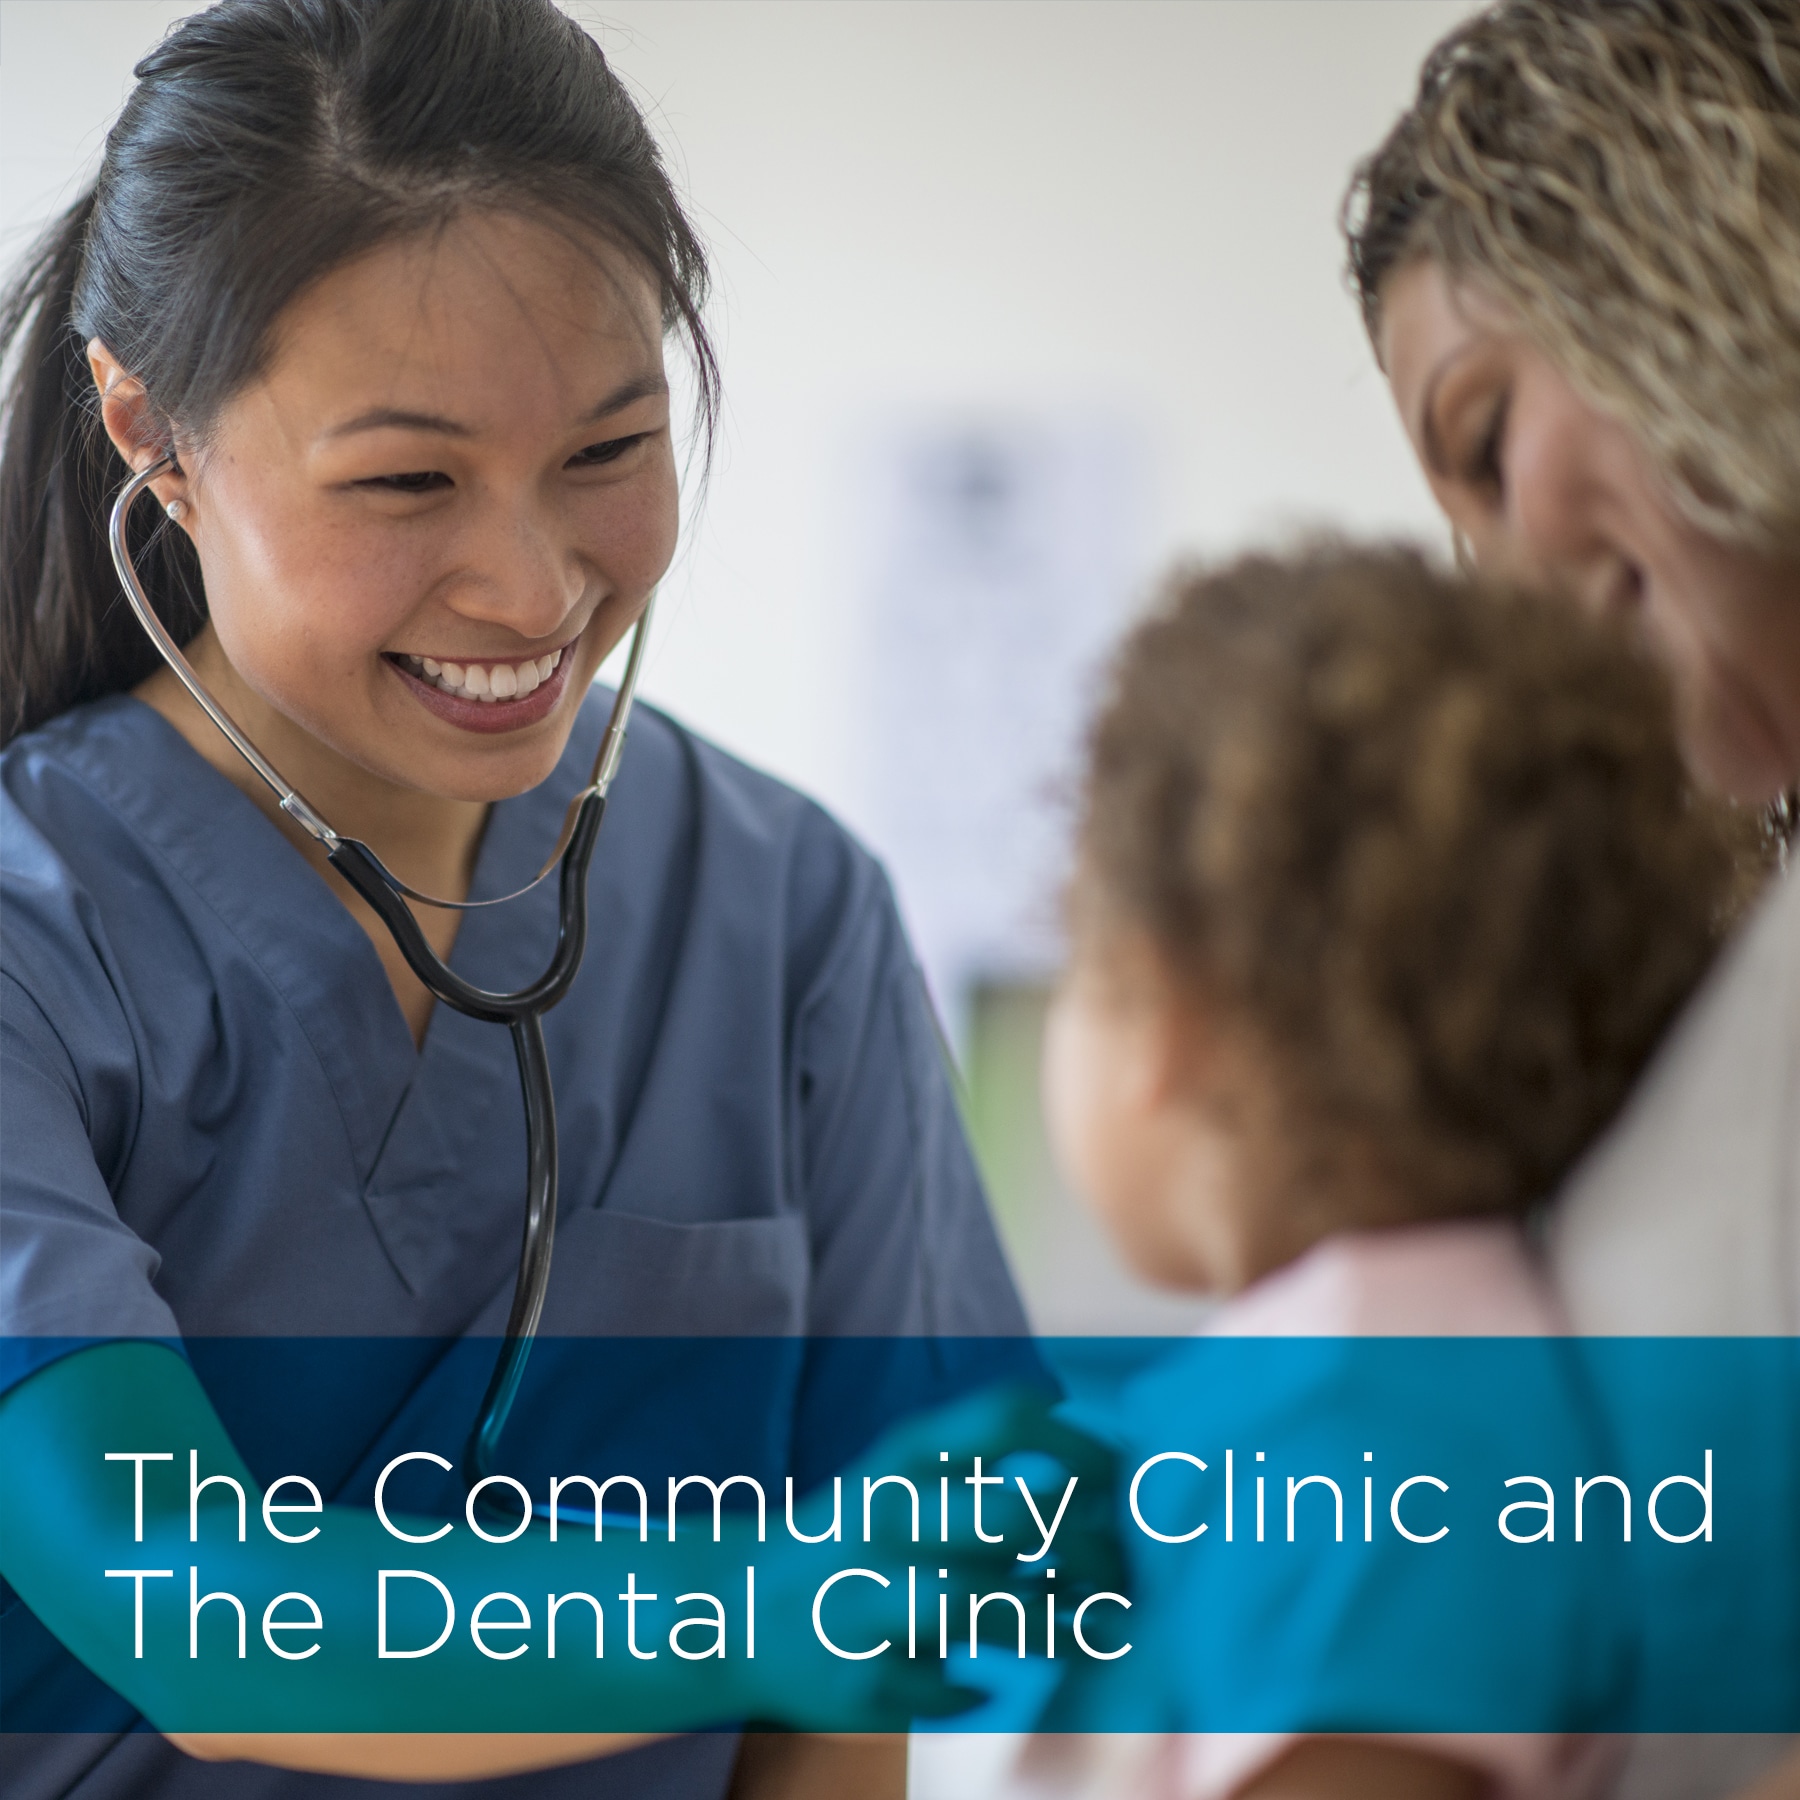 The Community Clinic and The Dental Clinic